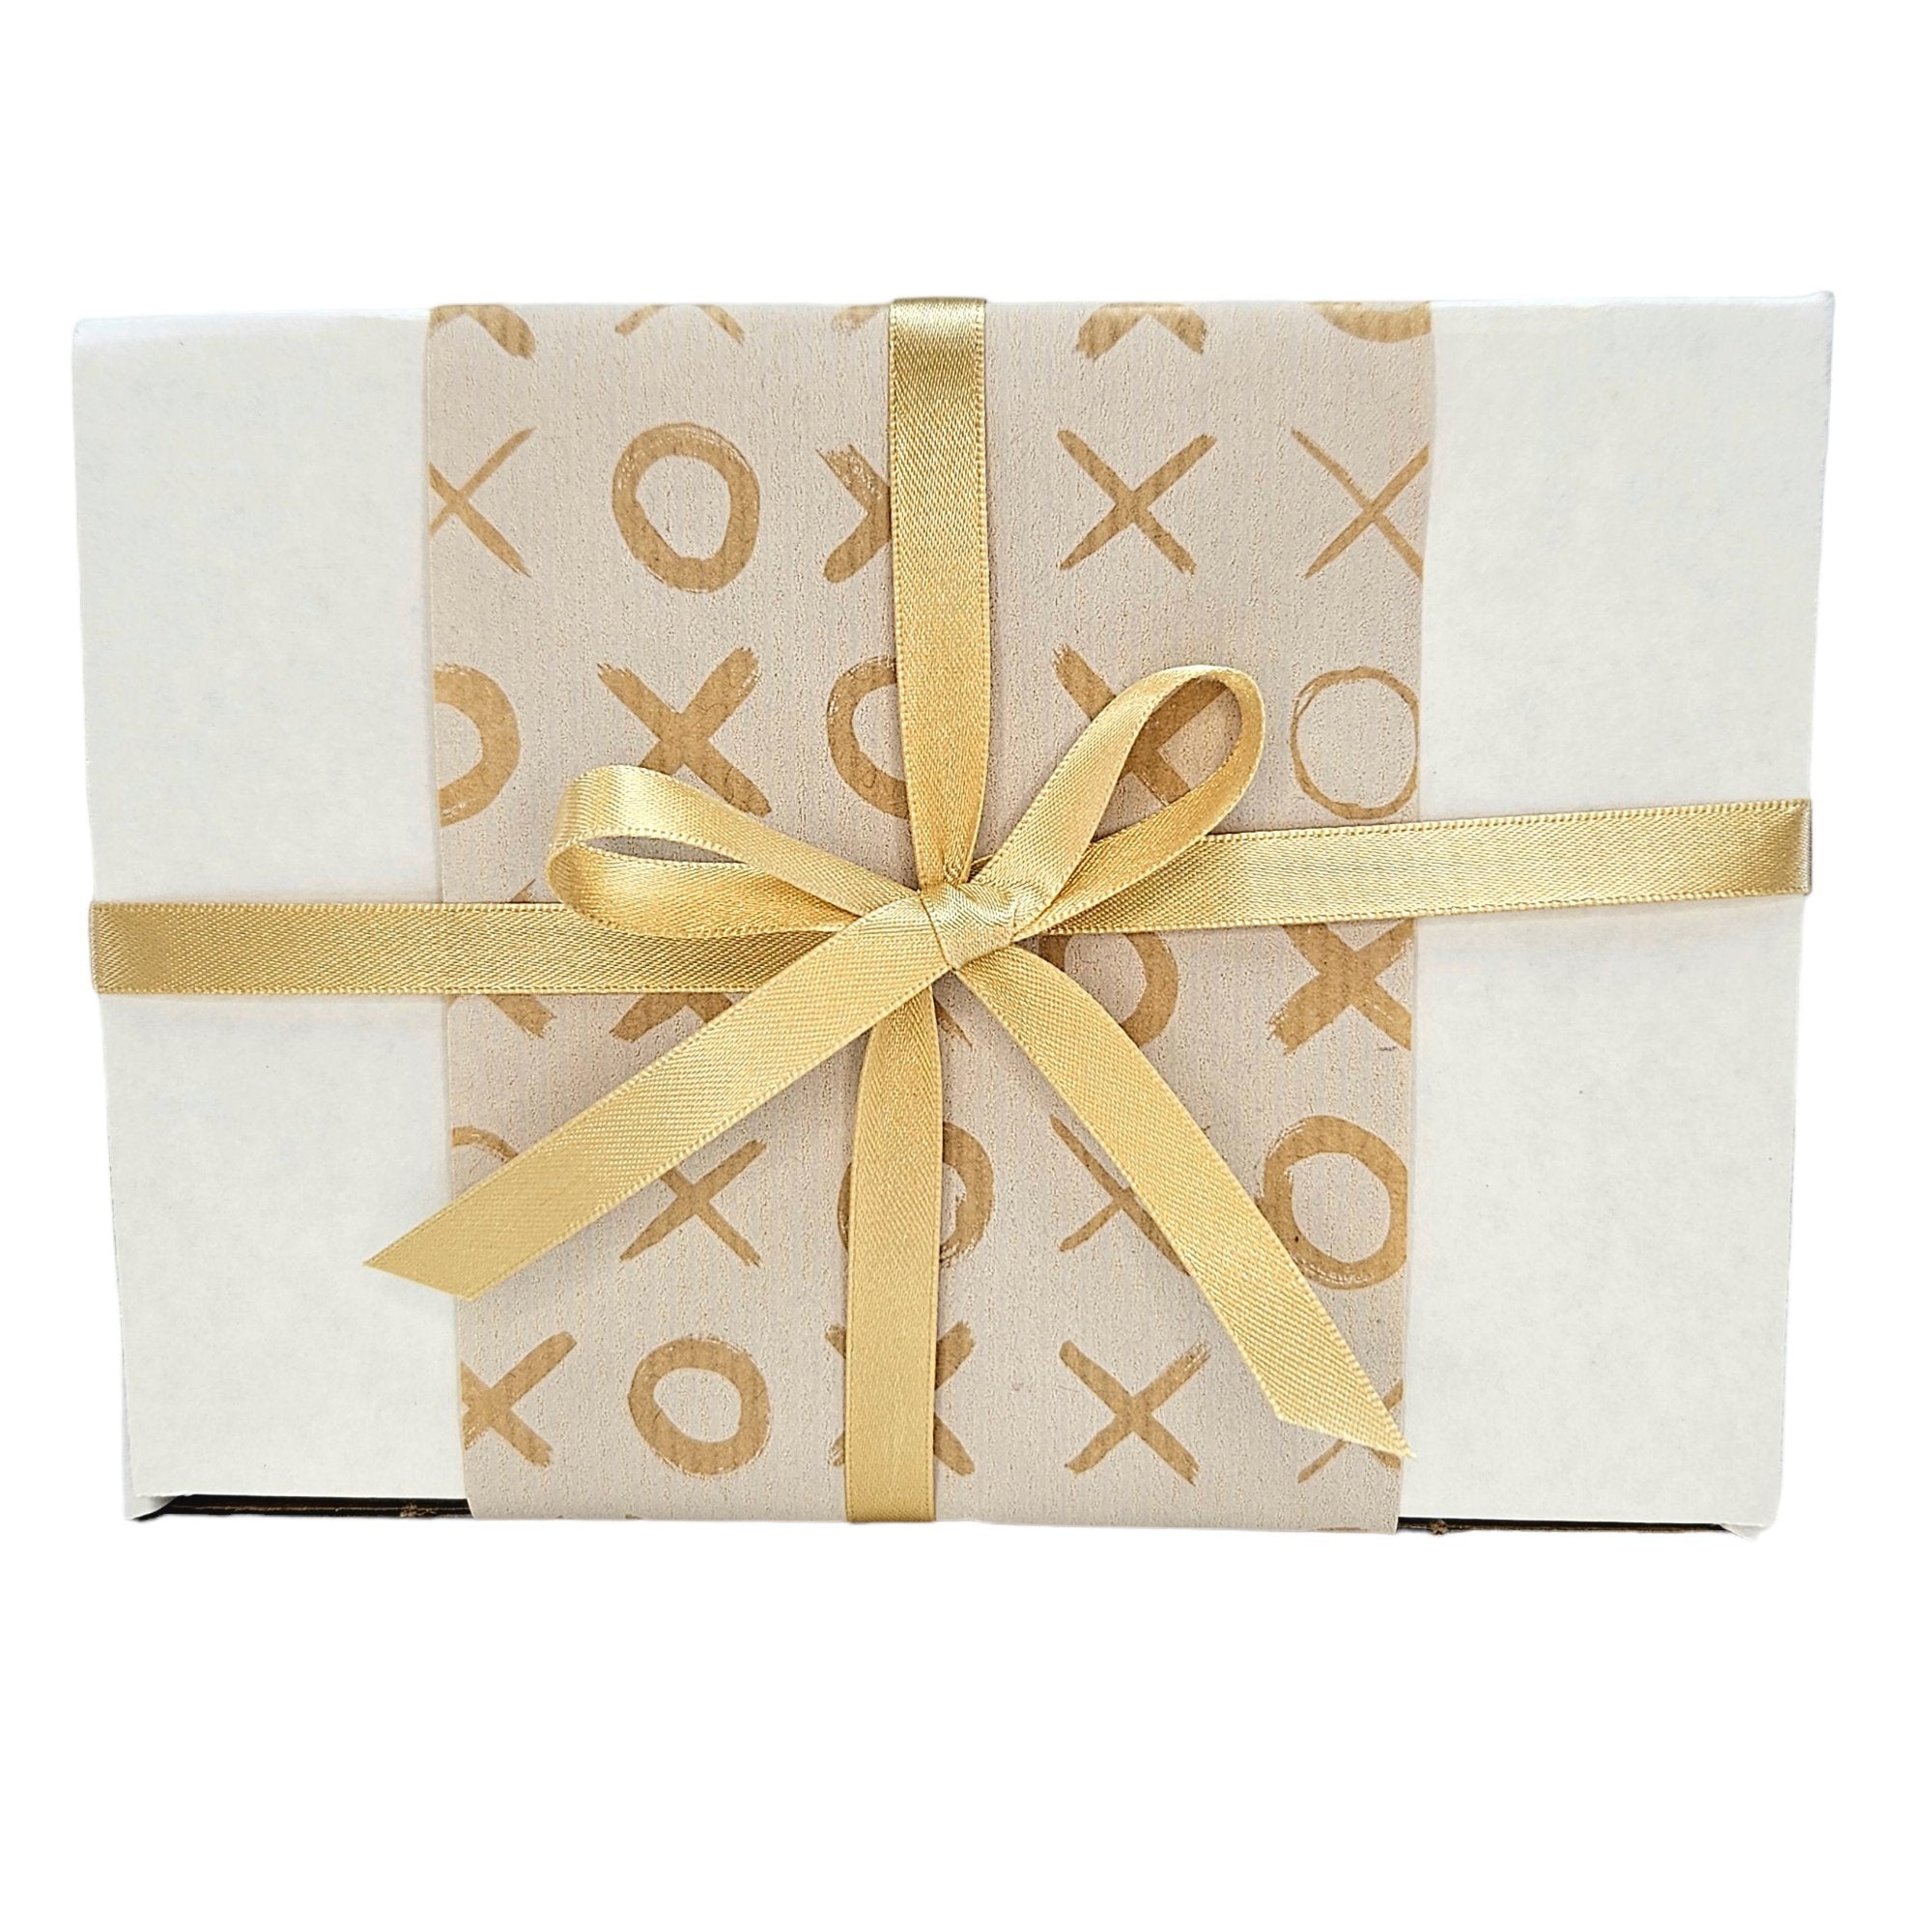 The perfect duo (Free delivery) - Beautiful Gifts